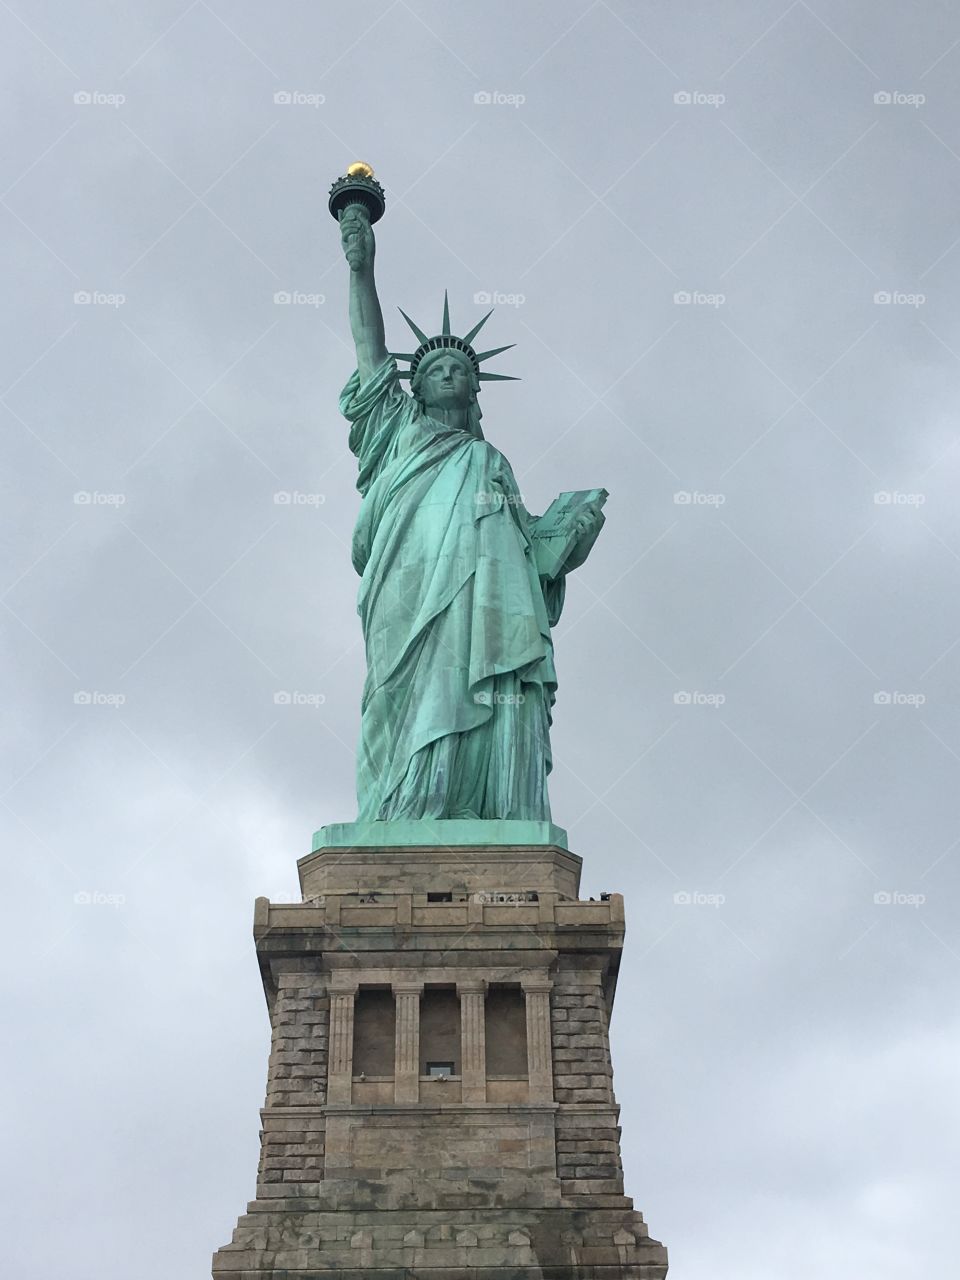 The Statue of Liberty, a symbol of America freedom, seen here from its base on Liberty Island.